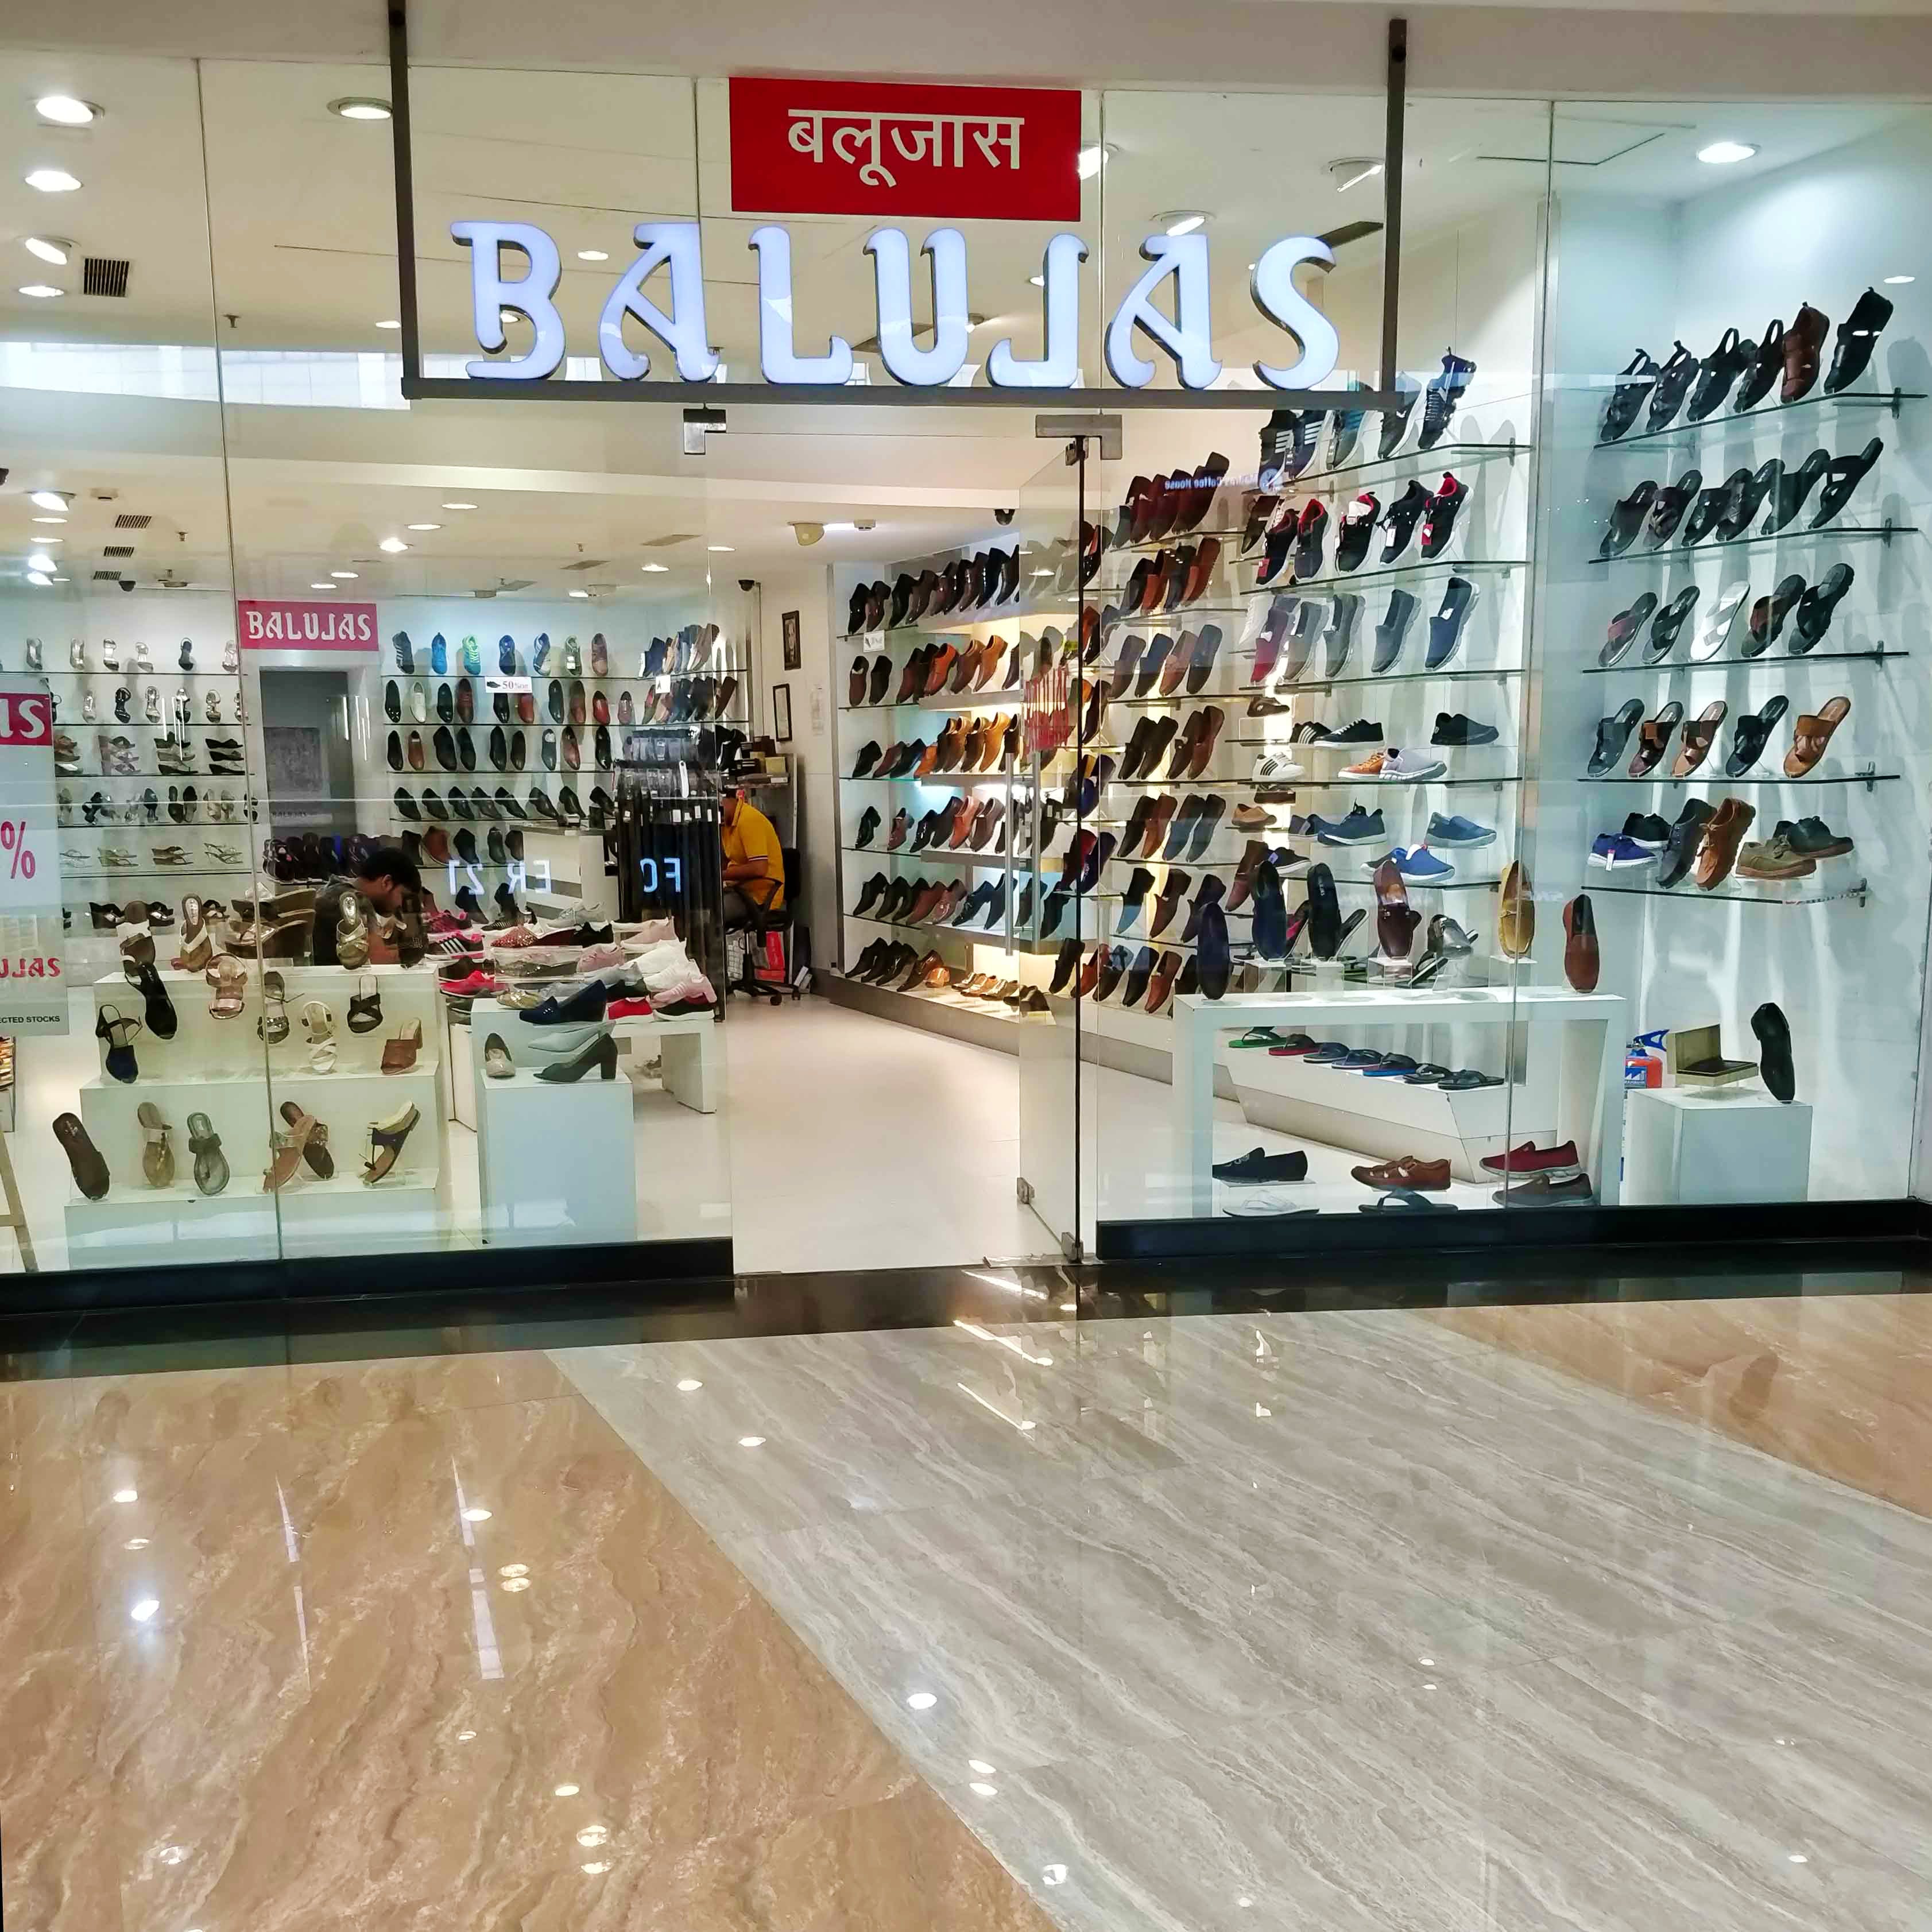 Eyewear,Retail,Building,Product,Outlet store,Footwear,Shopping mall,Floor,Shoe,Interior design